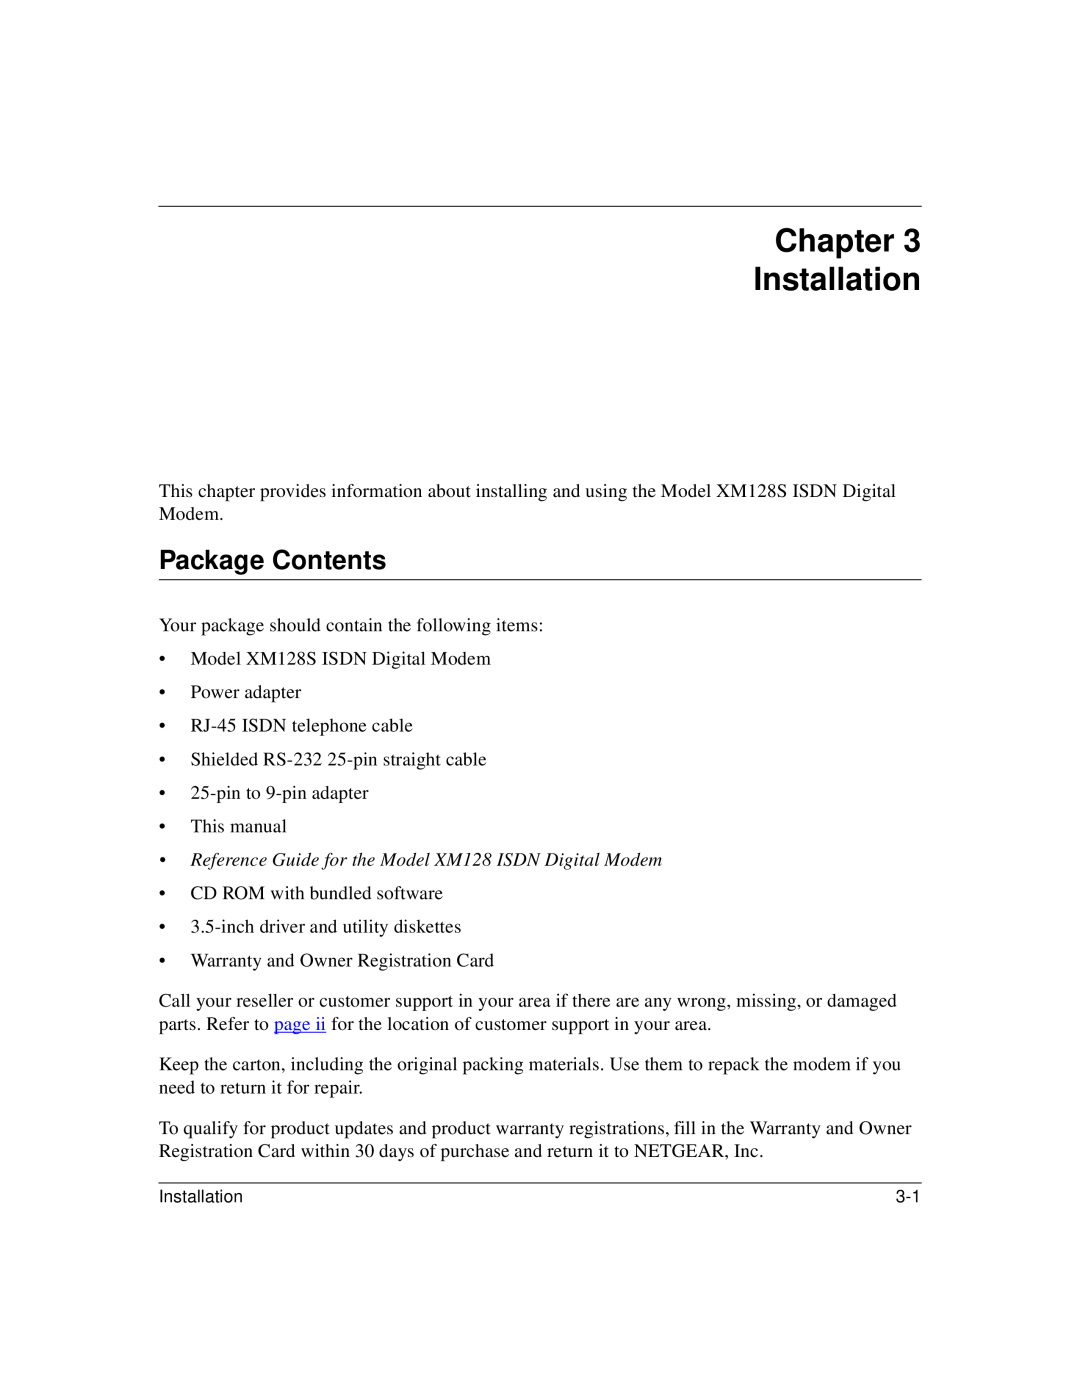 NETGEAR XM128S manual Chapter Installation, Package Contents, Reference Guide for the Model XM128 ISDN Digital Modem 